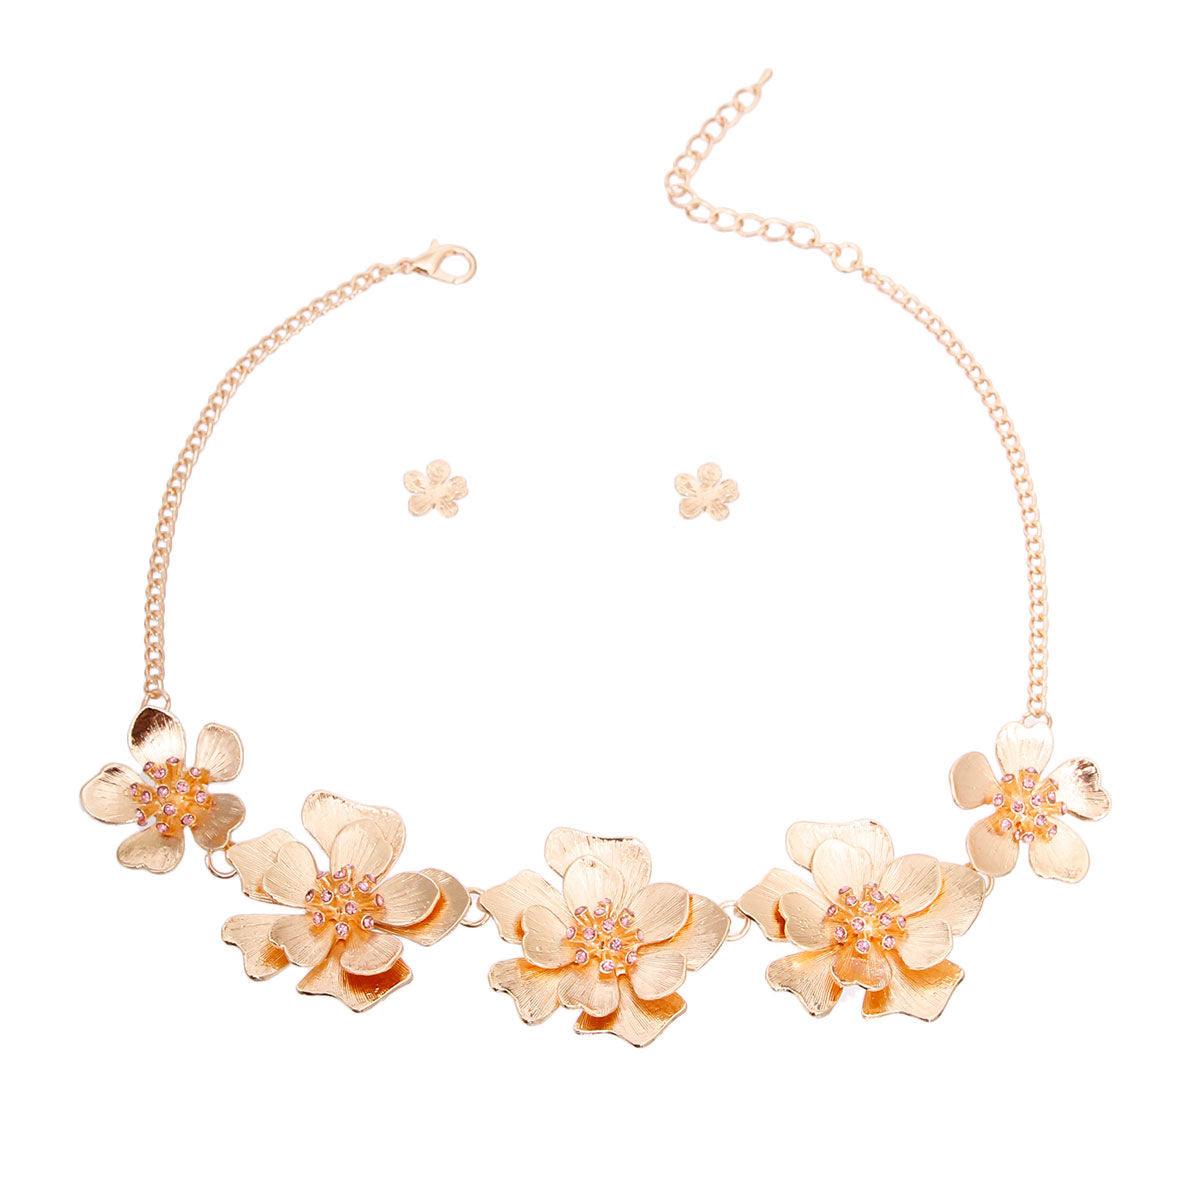 Get Noticed with our Stunning Gold/Pink Flower Necklace